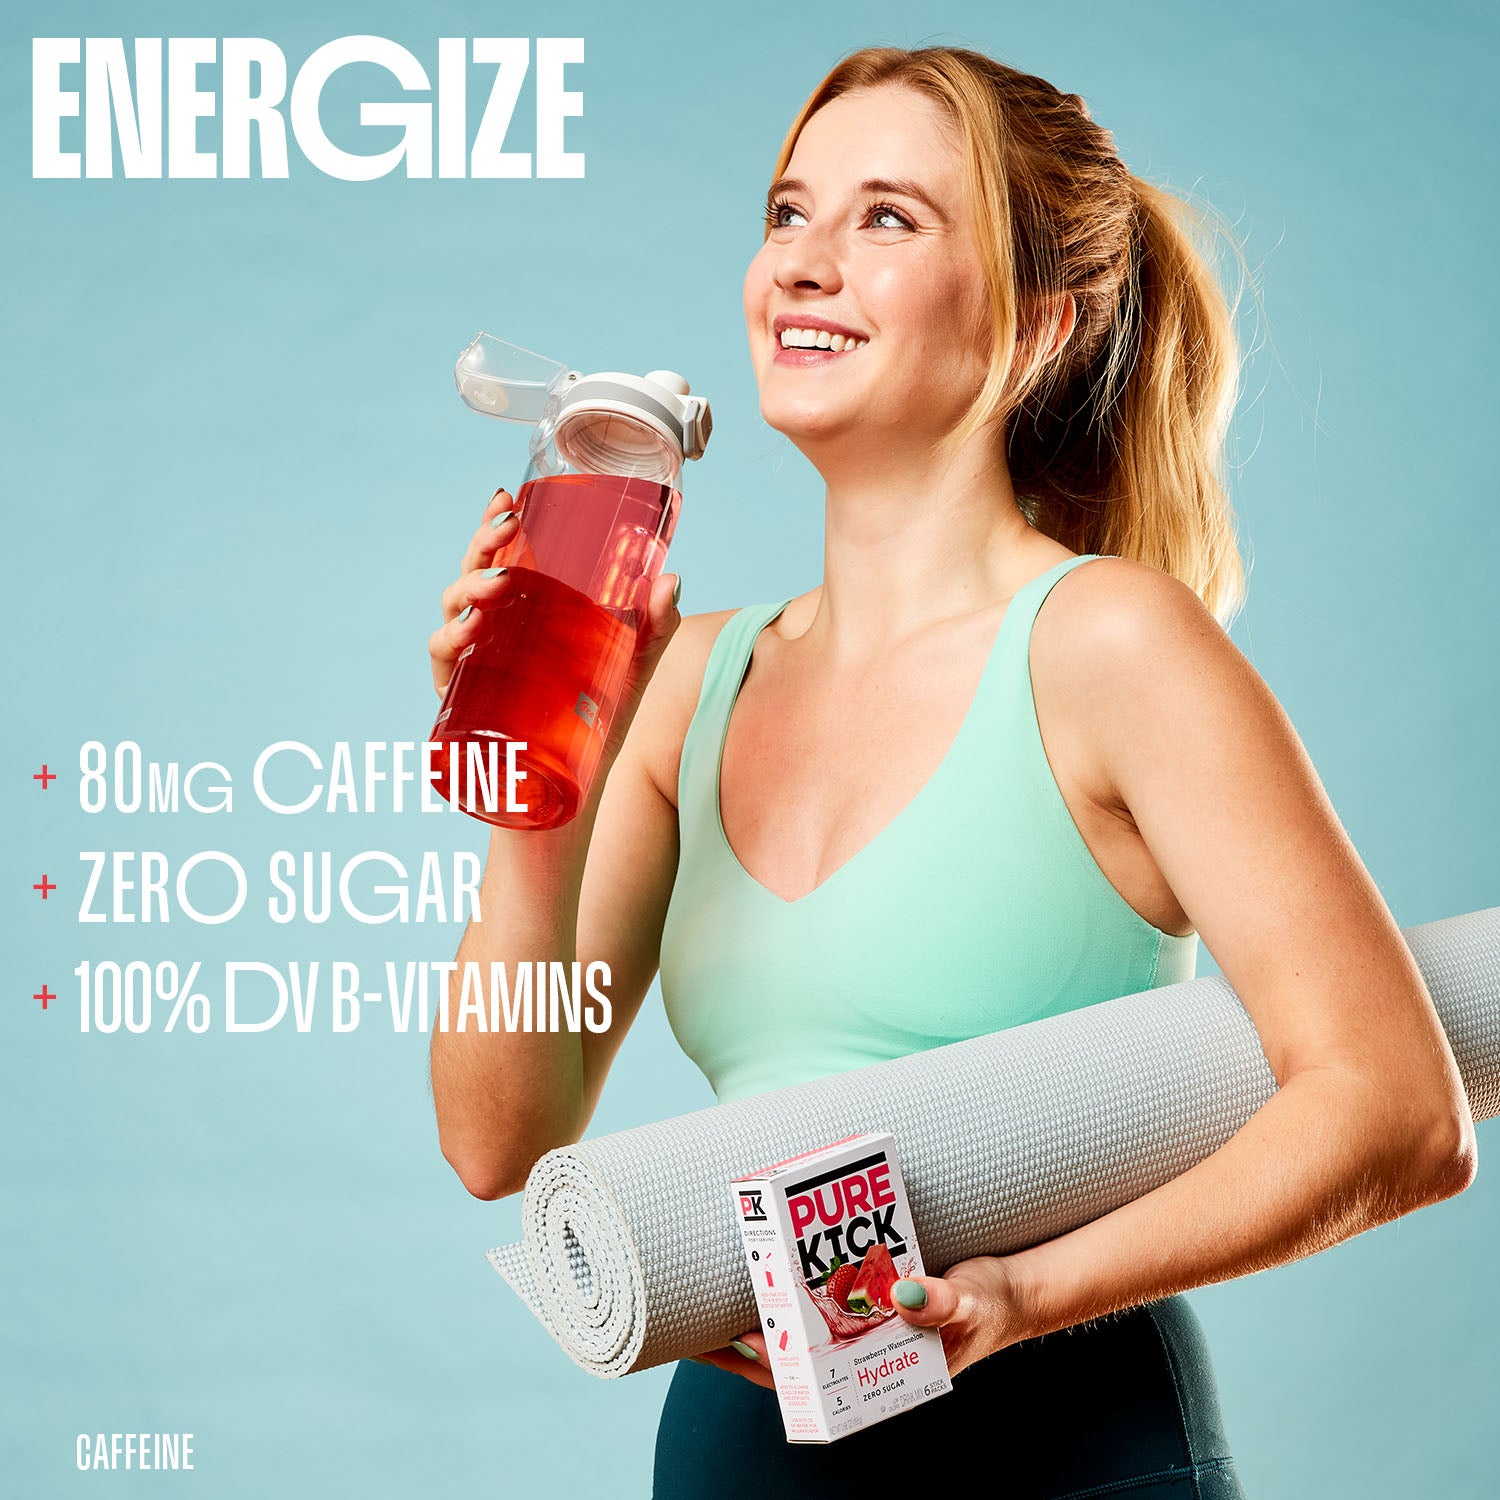 Energize your drink routine with 80mg Caffeine, zero sugar, 100 Percent Daily Value of B Vitamins, Workout Energy Drink Mixes